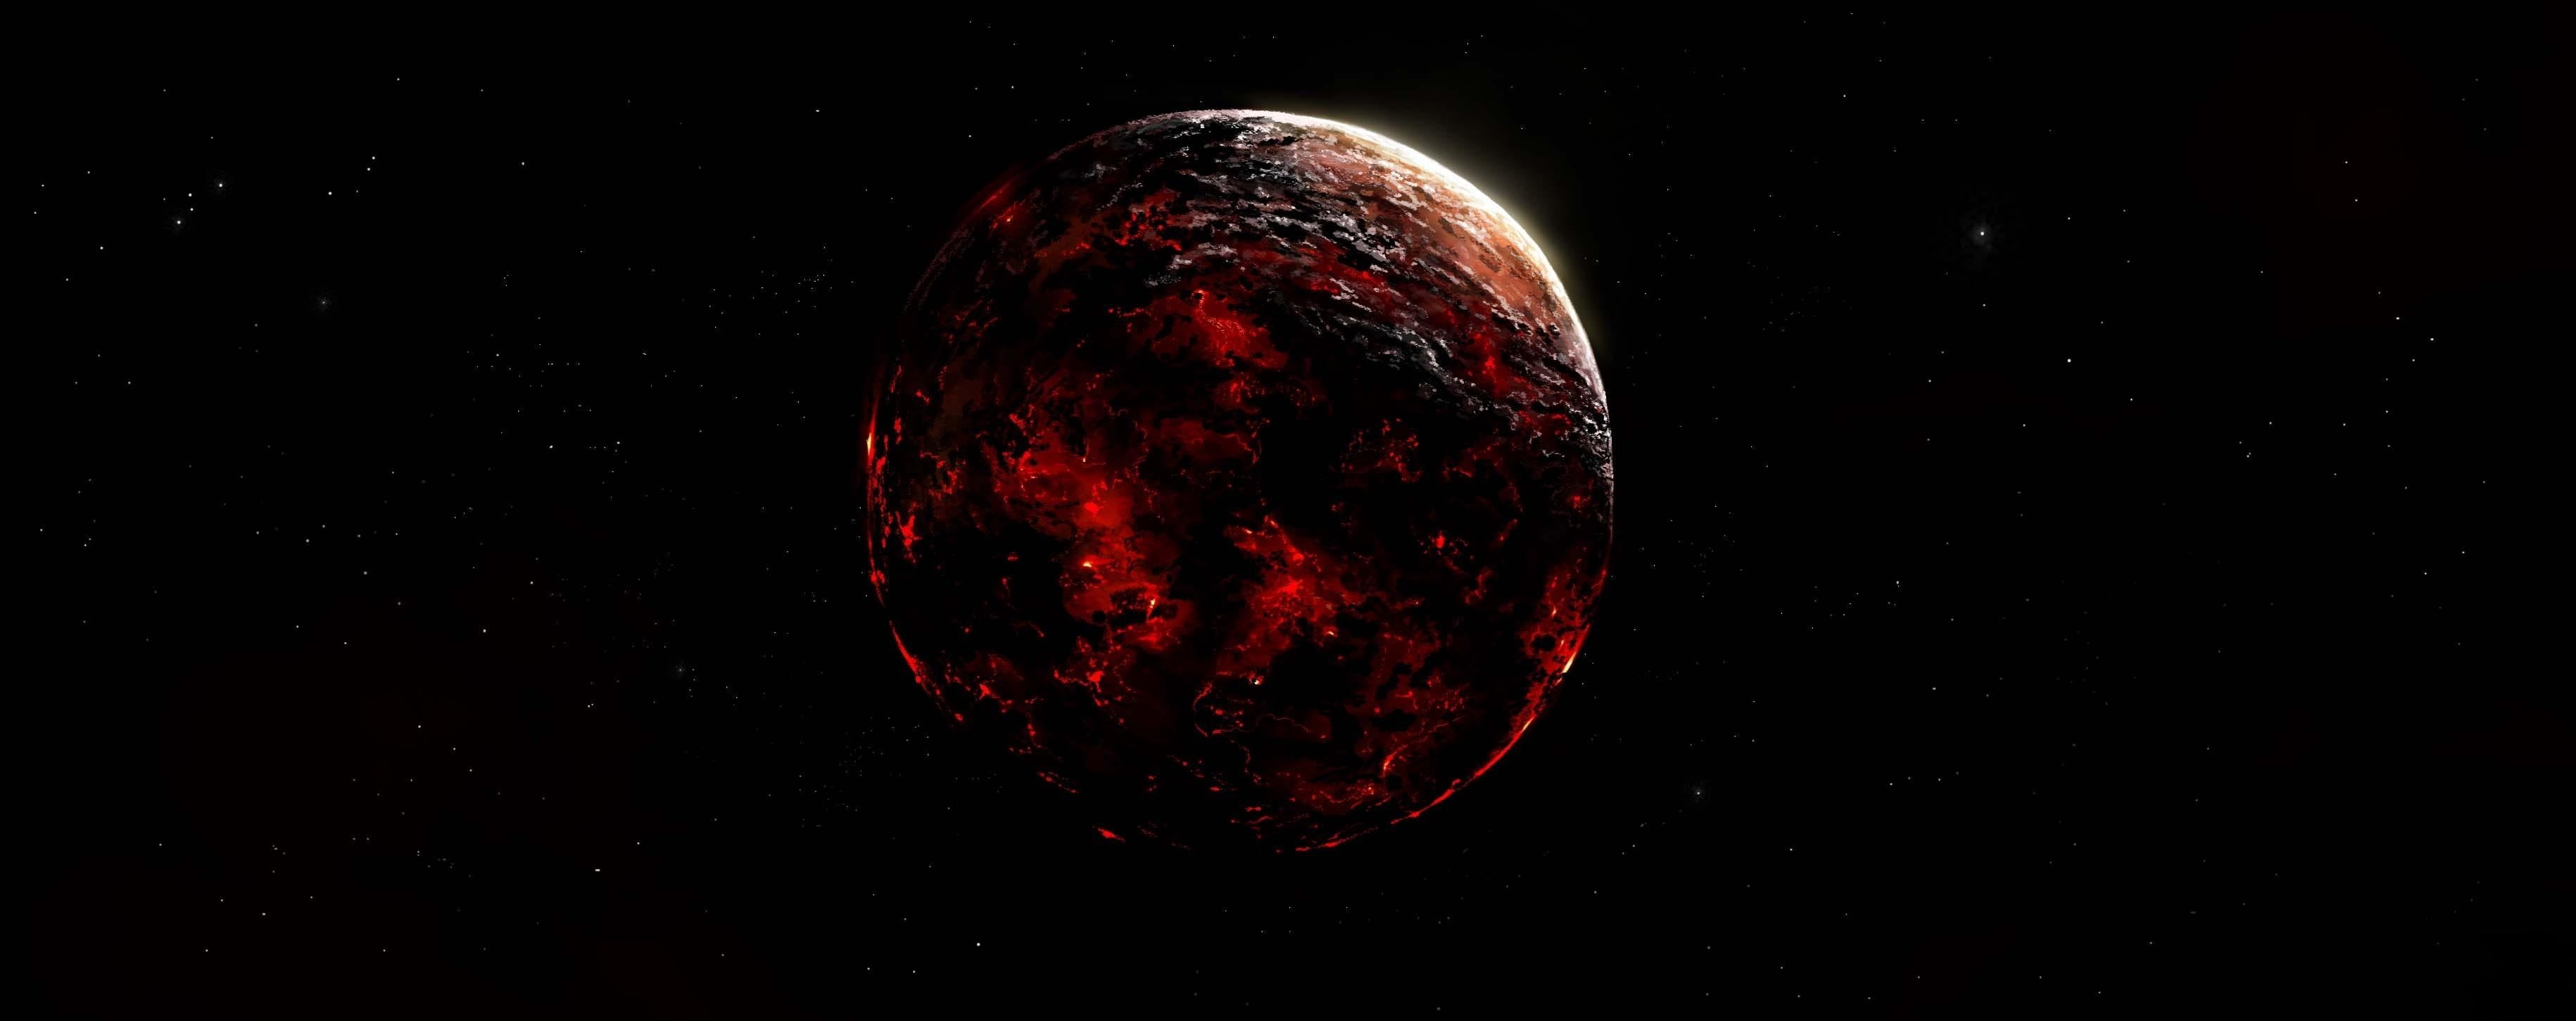 red and black planet, glowing, stars, space, planet - Space, astronomy